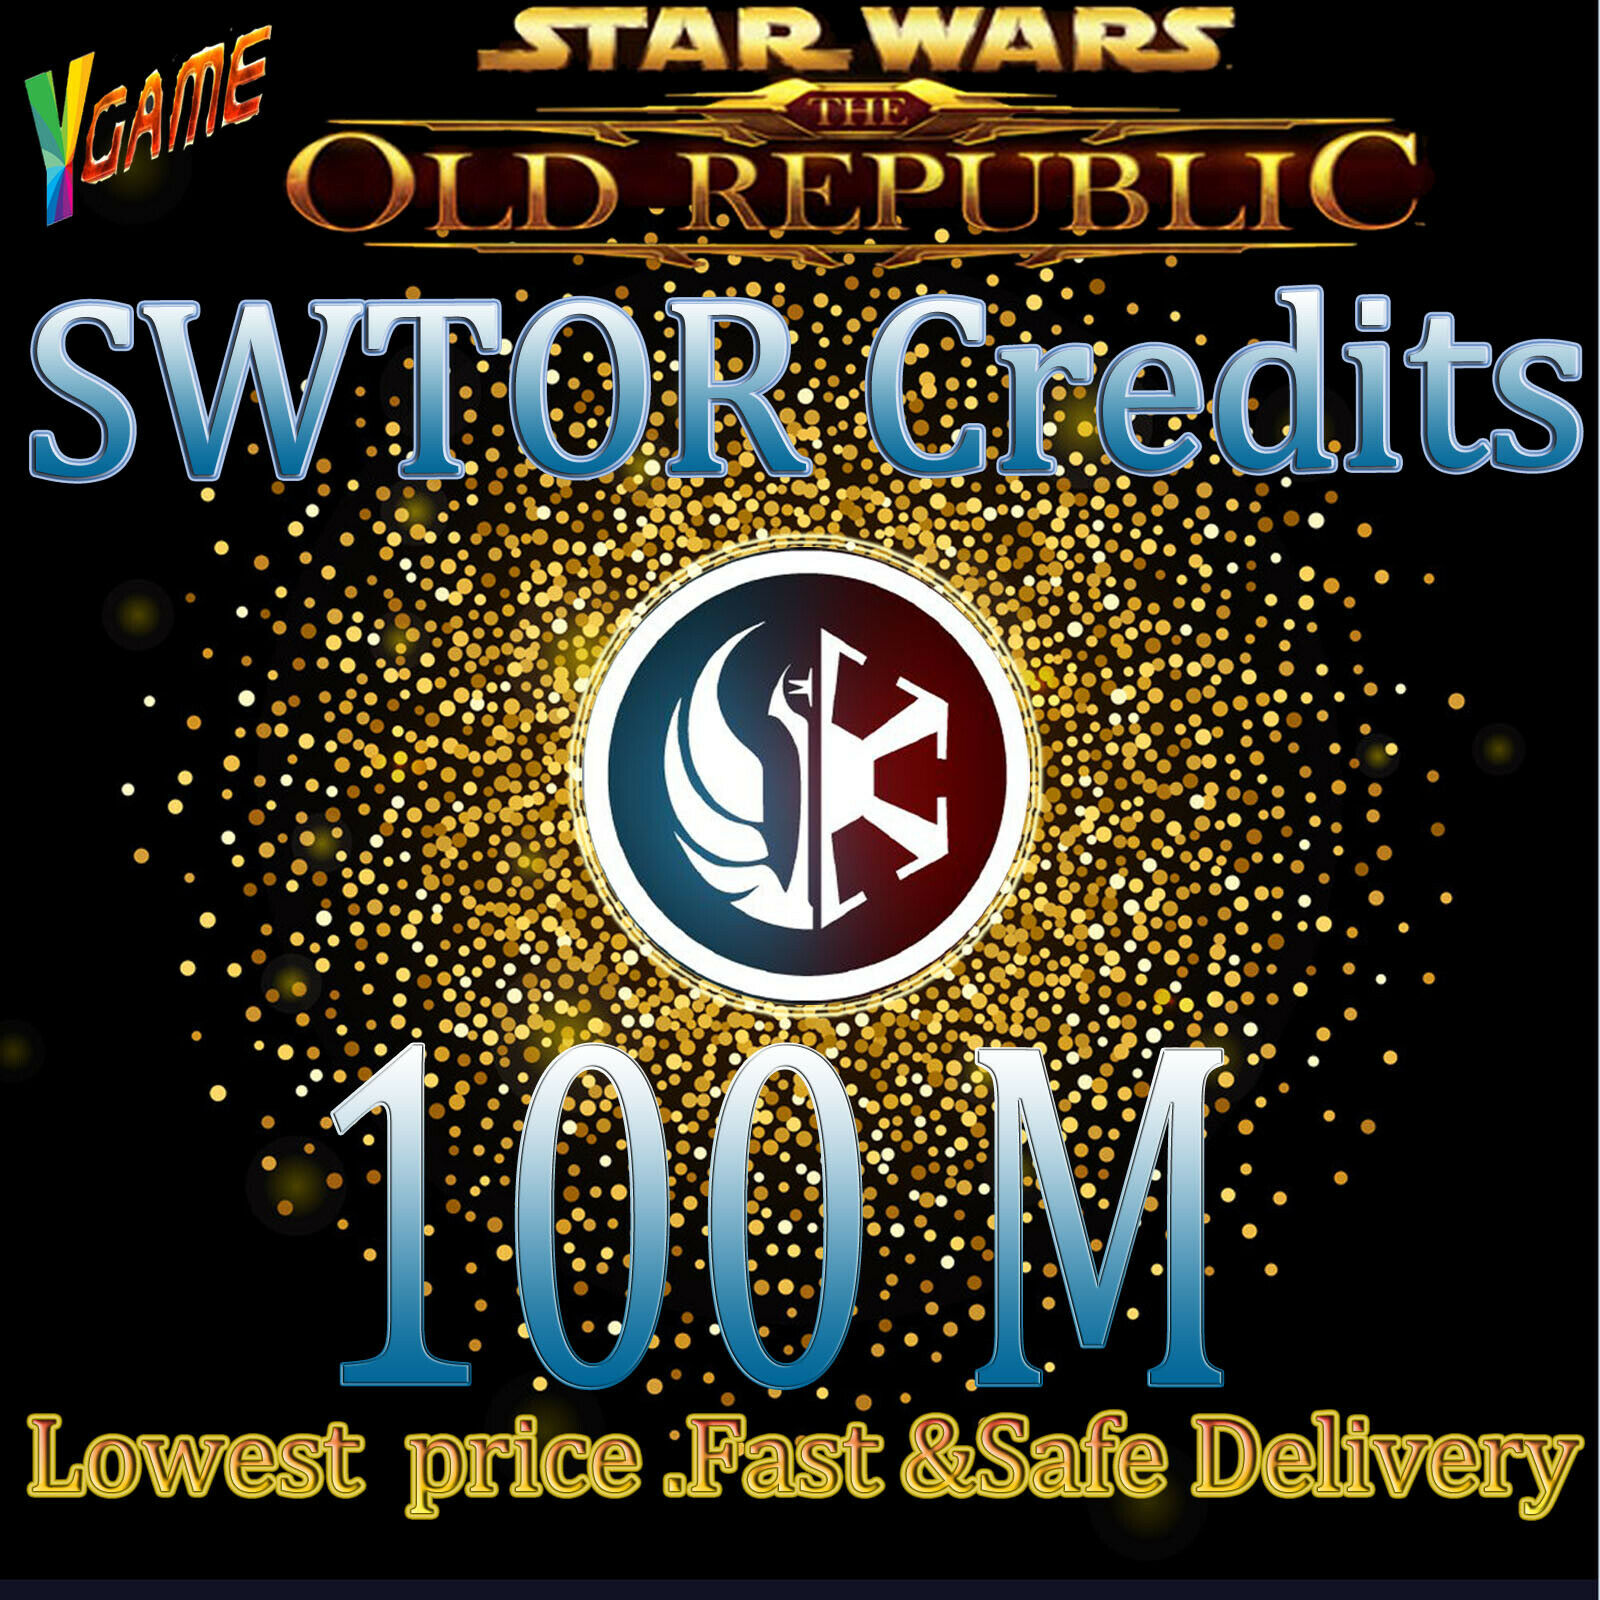 Swtor Credits| 100 Million Star Wars The Old Of Republic Credits|7x24 Online